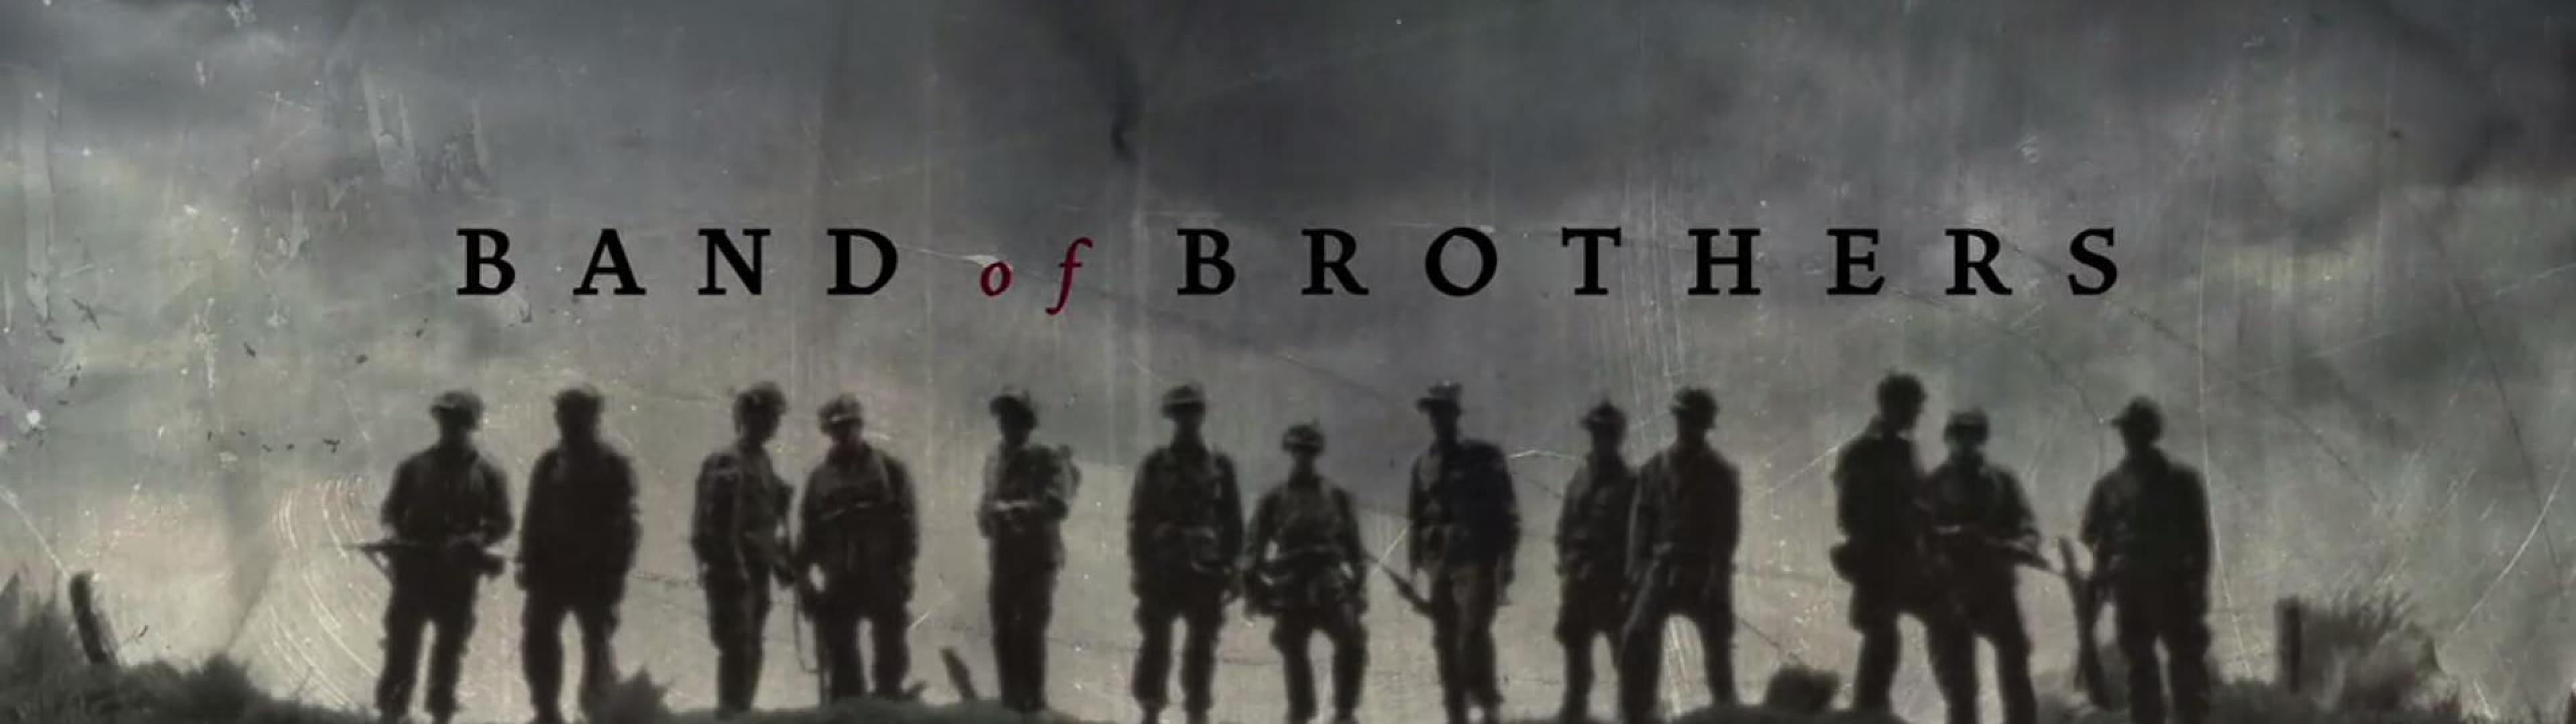 Wallpaper ID 841776  1080P band of brothers brothers war hbo drama  band weapon battle soldier action gun military free download